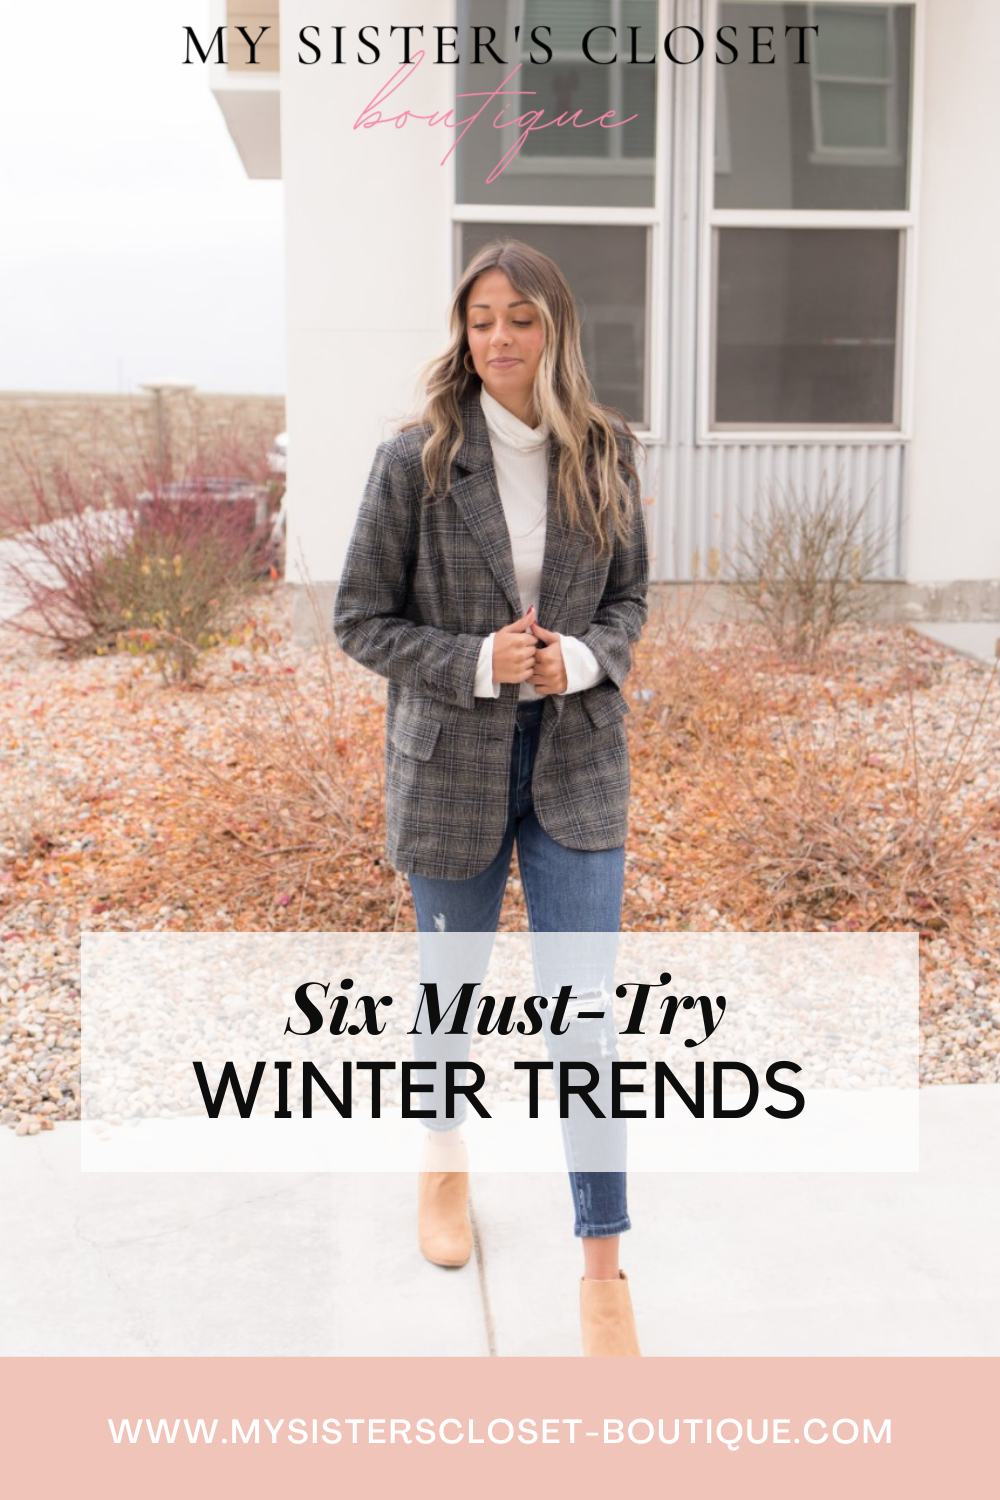 Six Trends to Try This Winter – My Sister's Closet